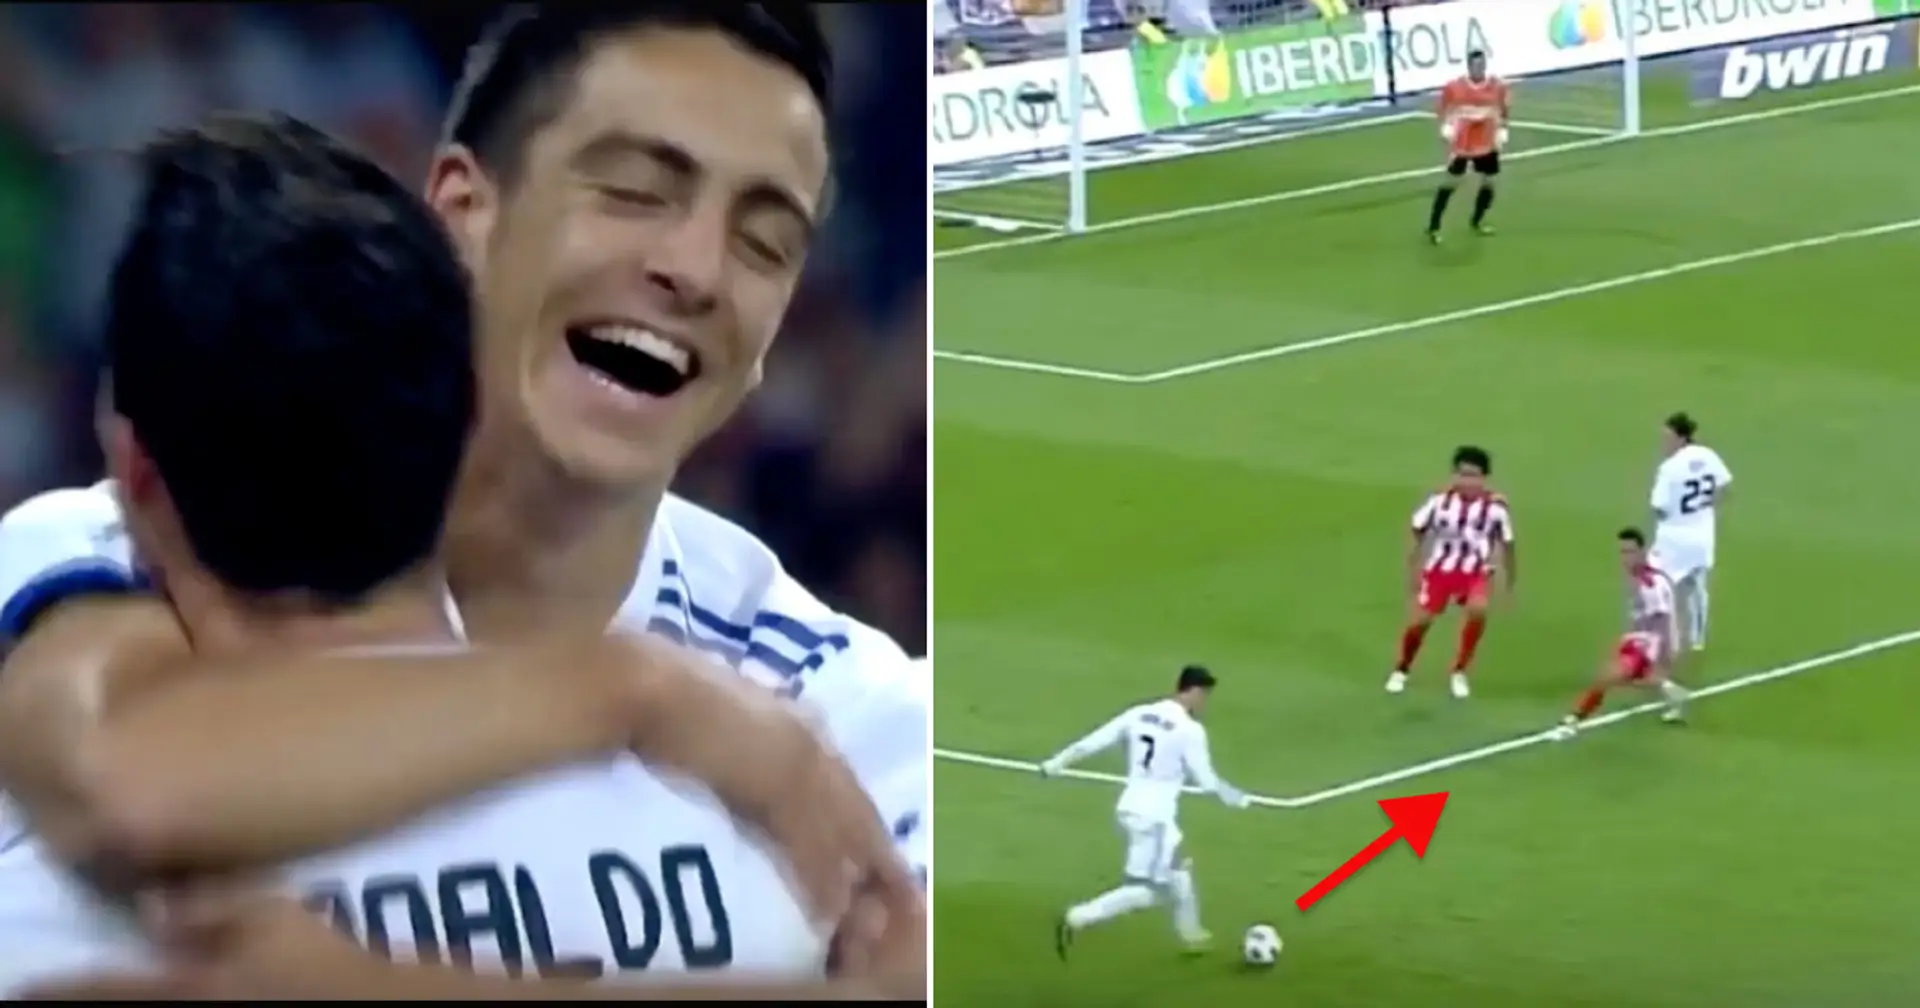 Recalling Joselu's debut goal for Real Madrid — came in as Benzema sub, Cristiano assisted him